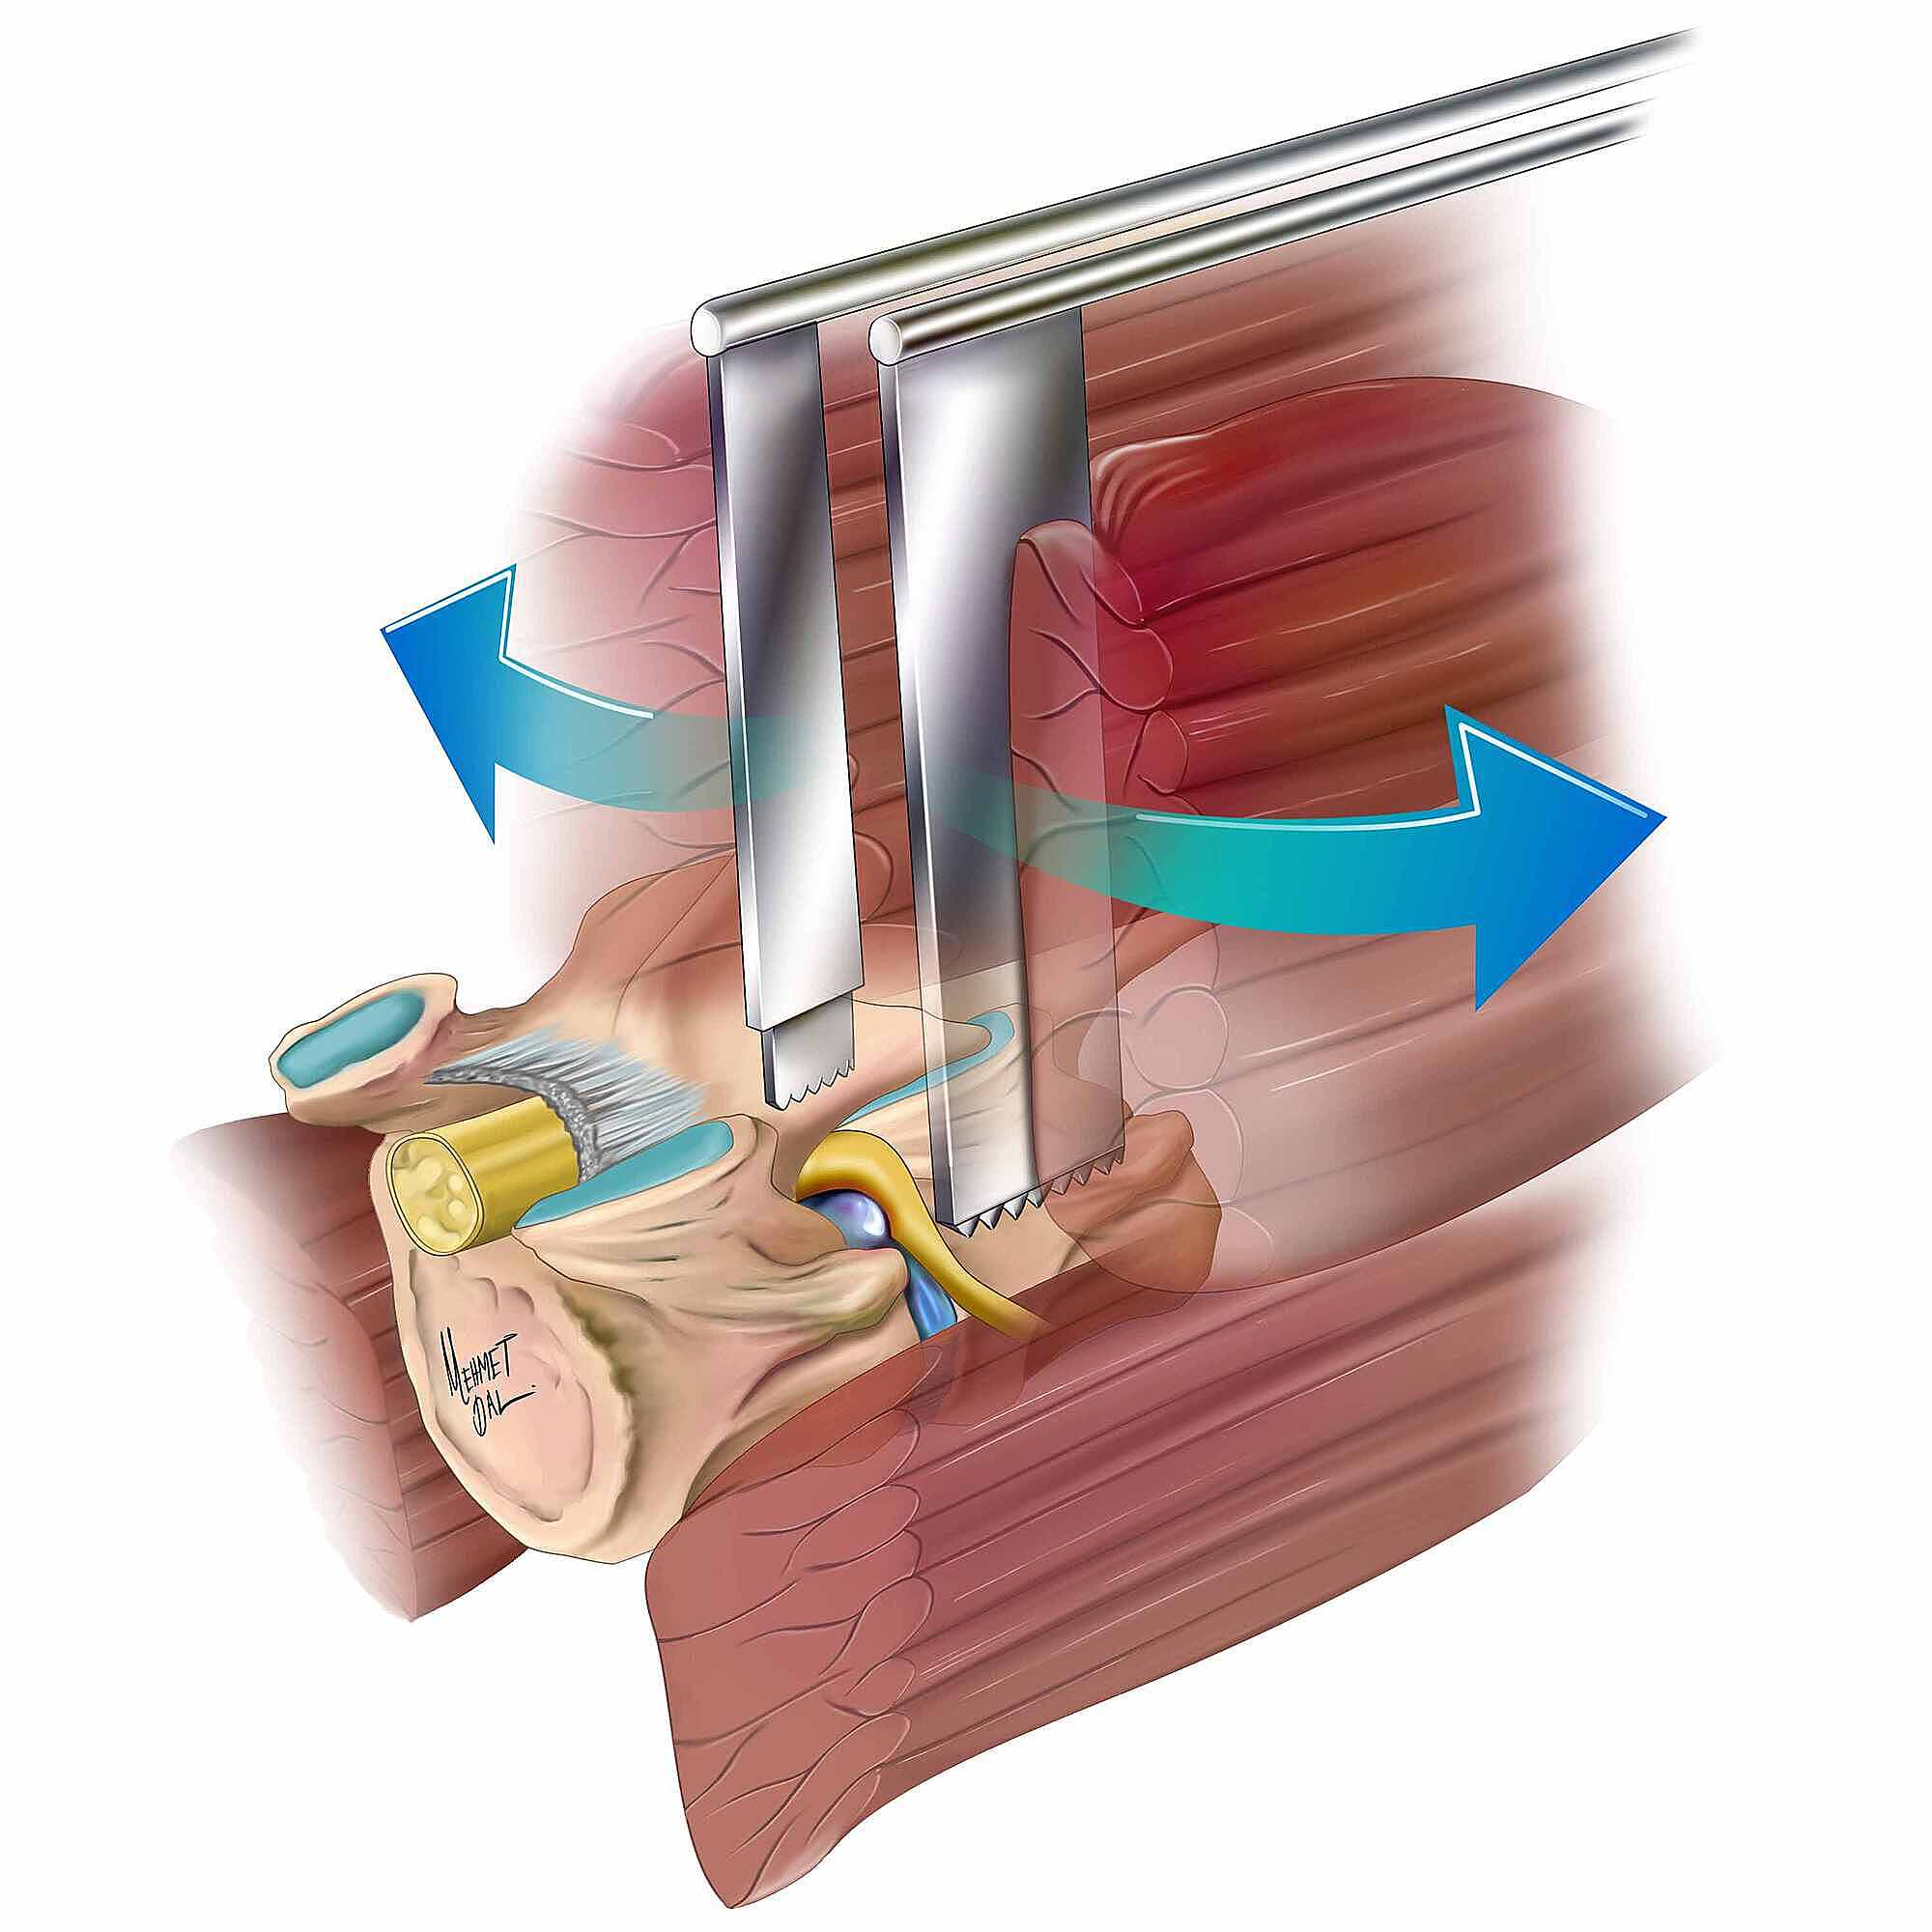 Cureus Minimally Invasive Far Lateral Microdiscectomy A New Retractor For Far Lateral Lumbar 8601